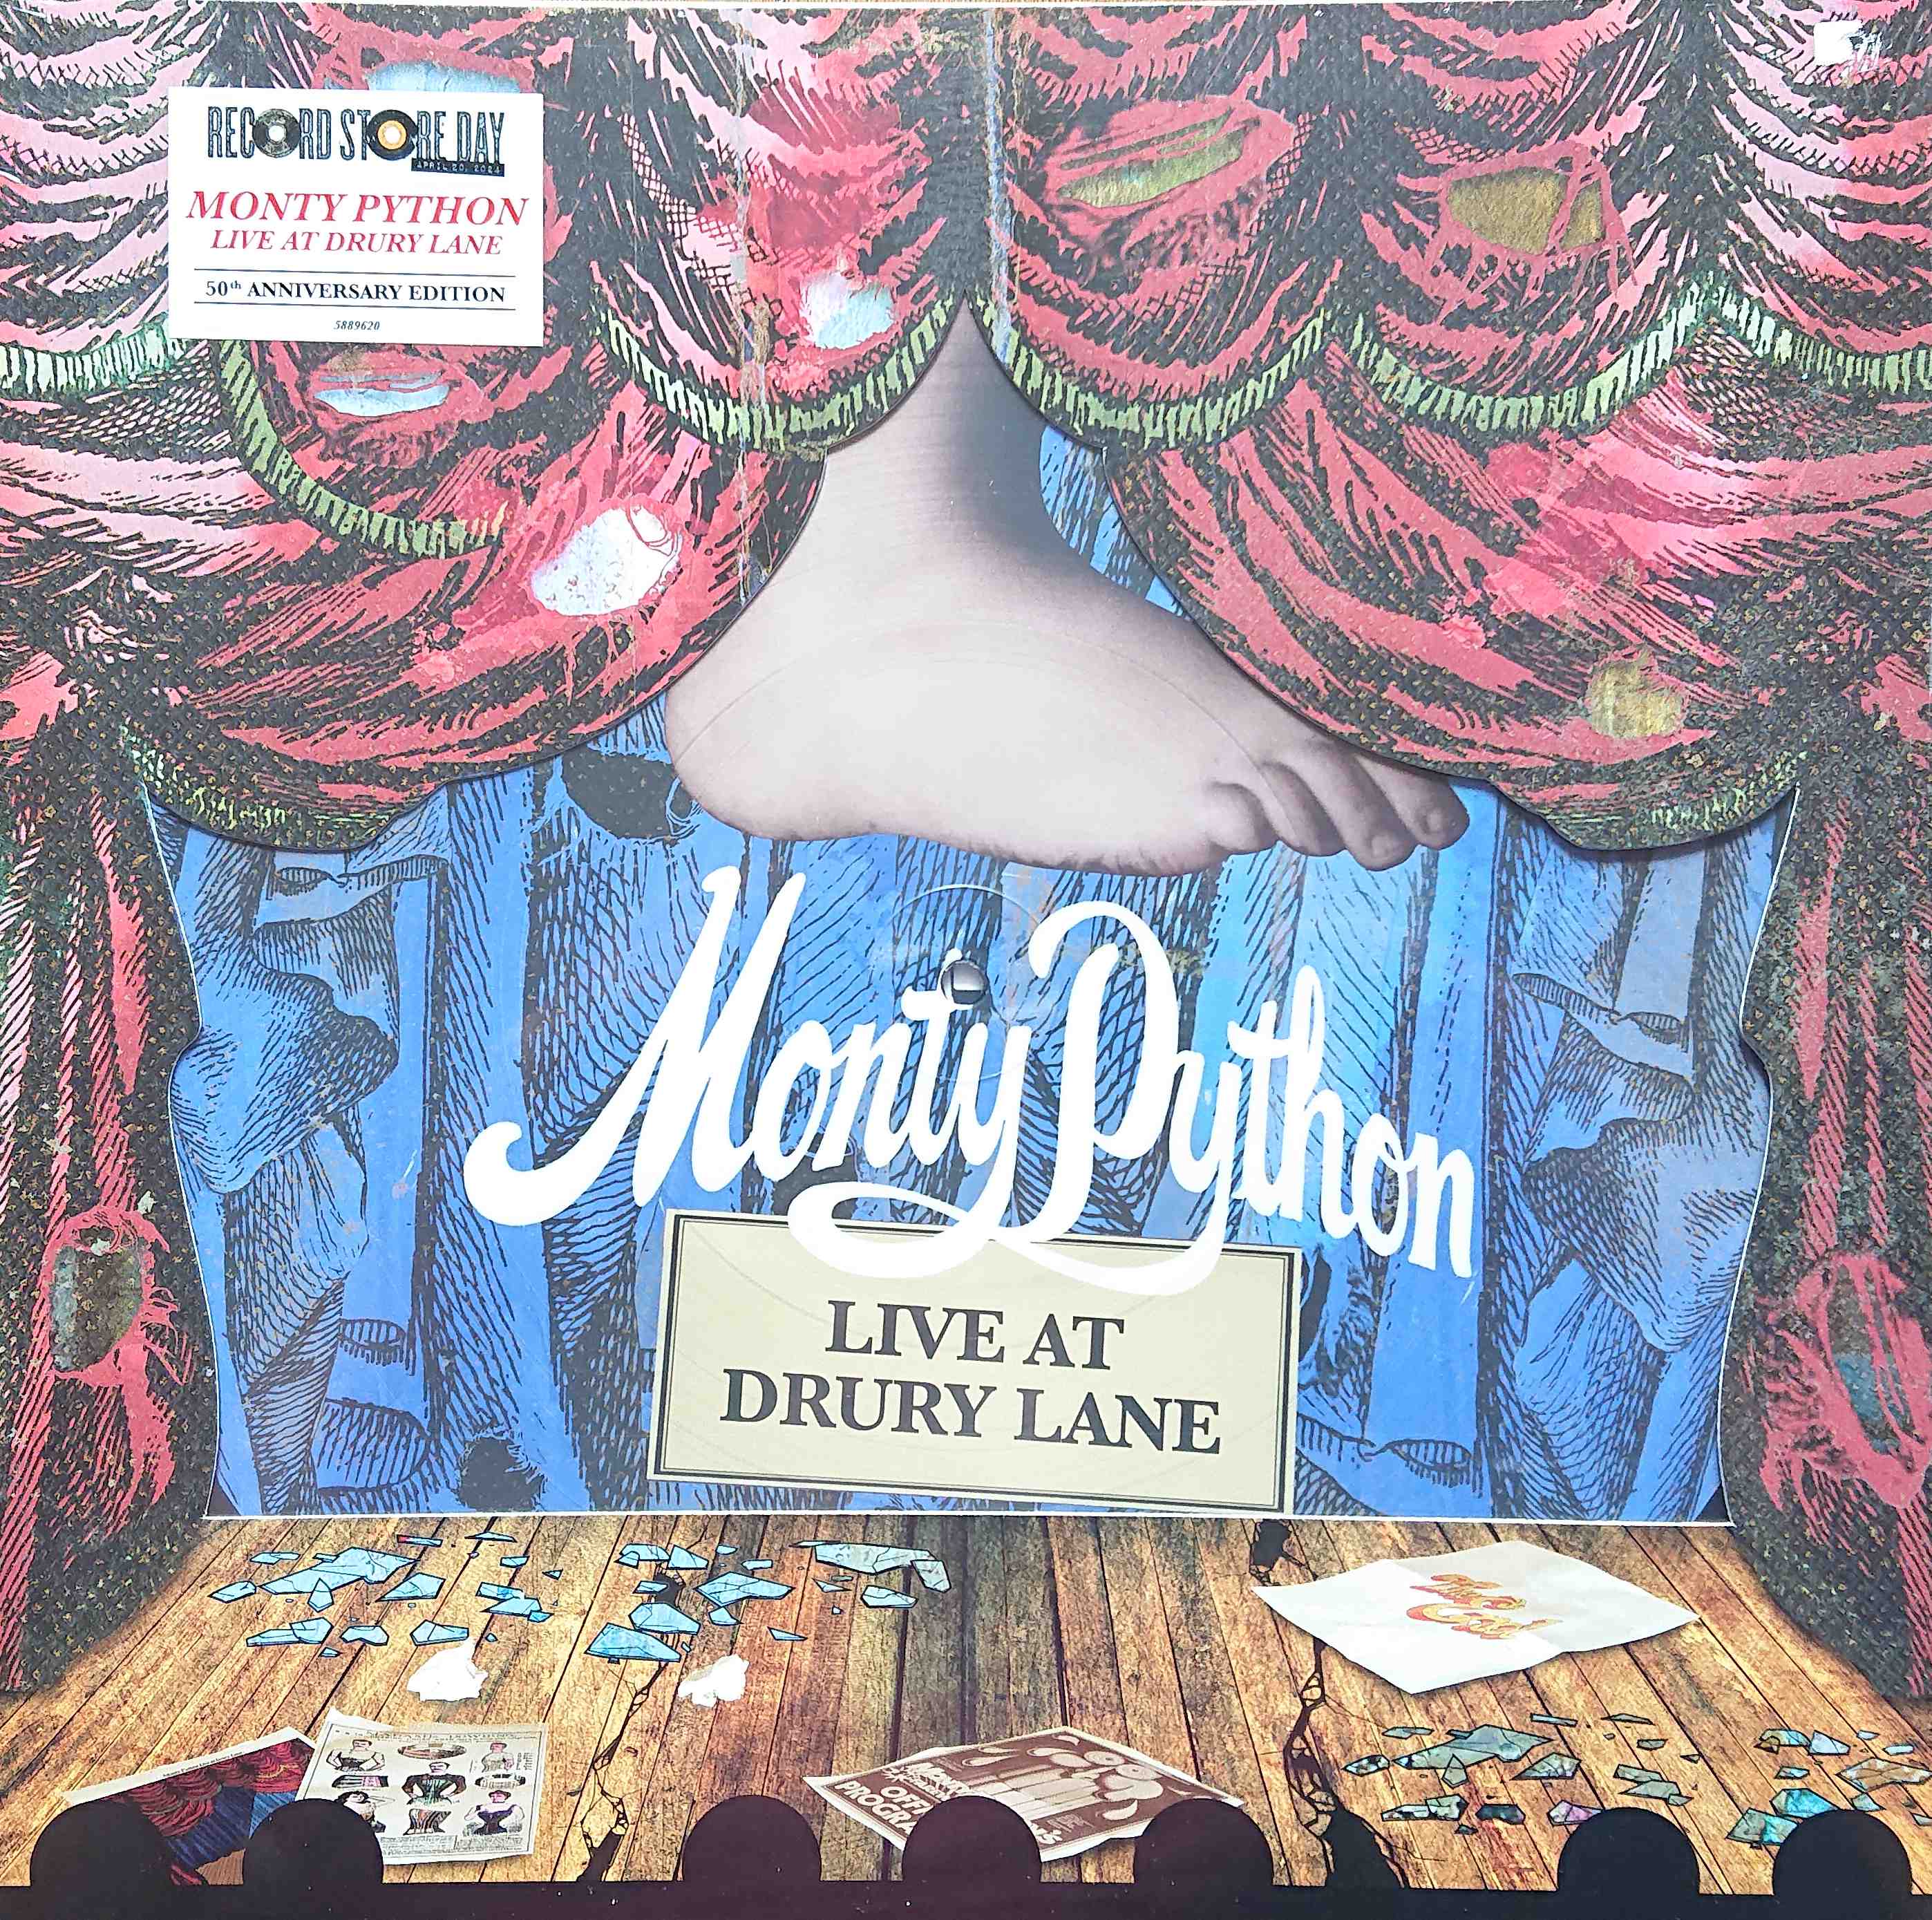 Picture of Live at Drury Lane by artist Monty Python from the BBC albums - Records and Tapes library